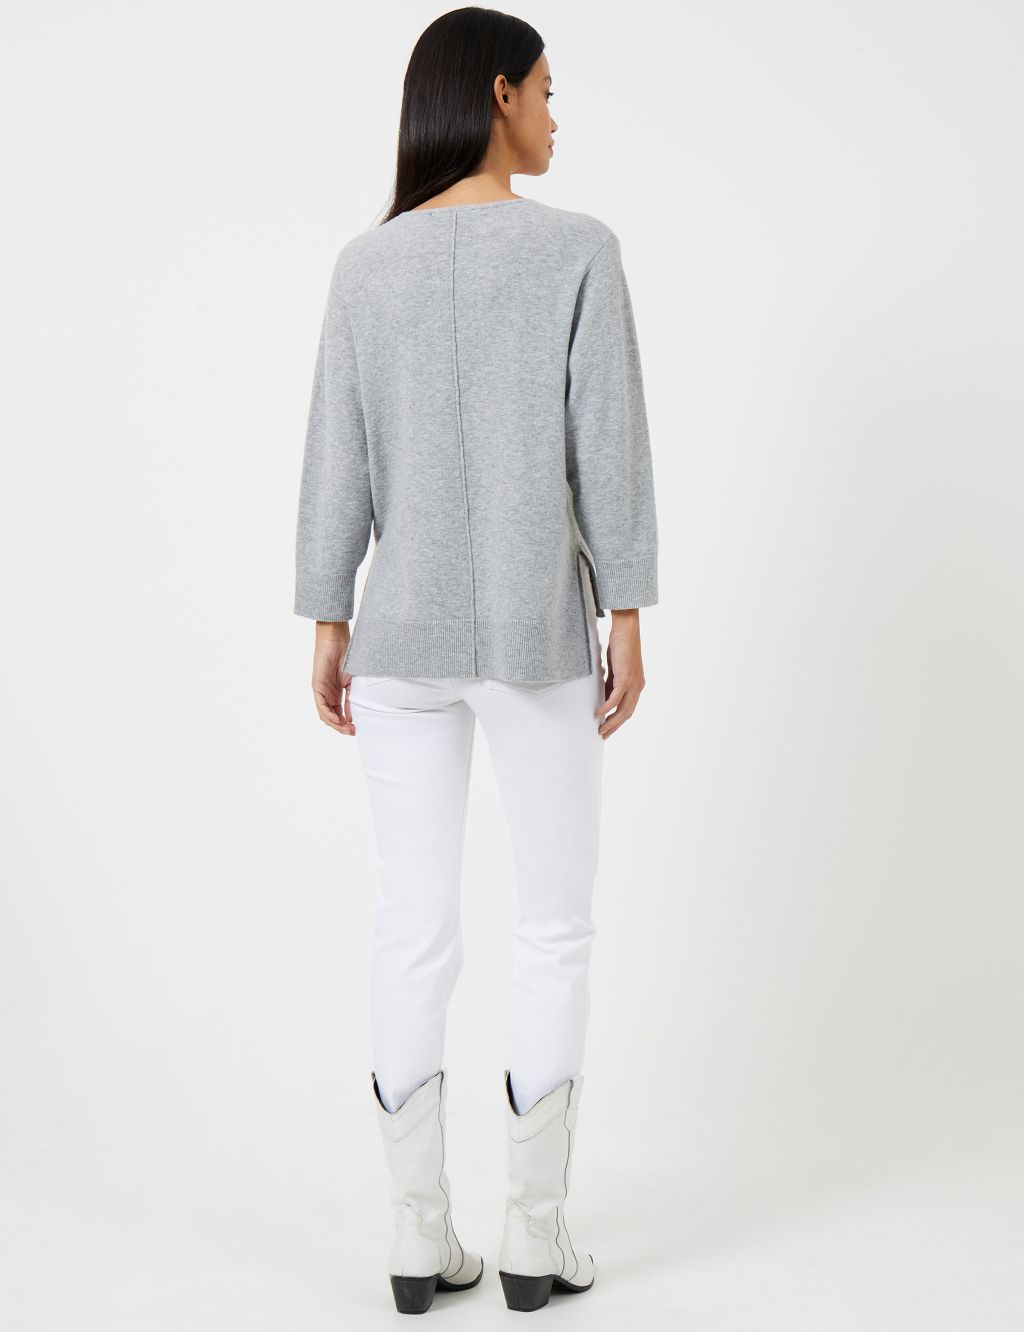 Textured V-Neck Relaxed Jumper with Wool image 3